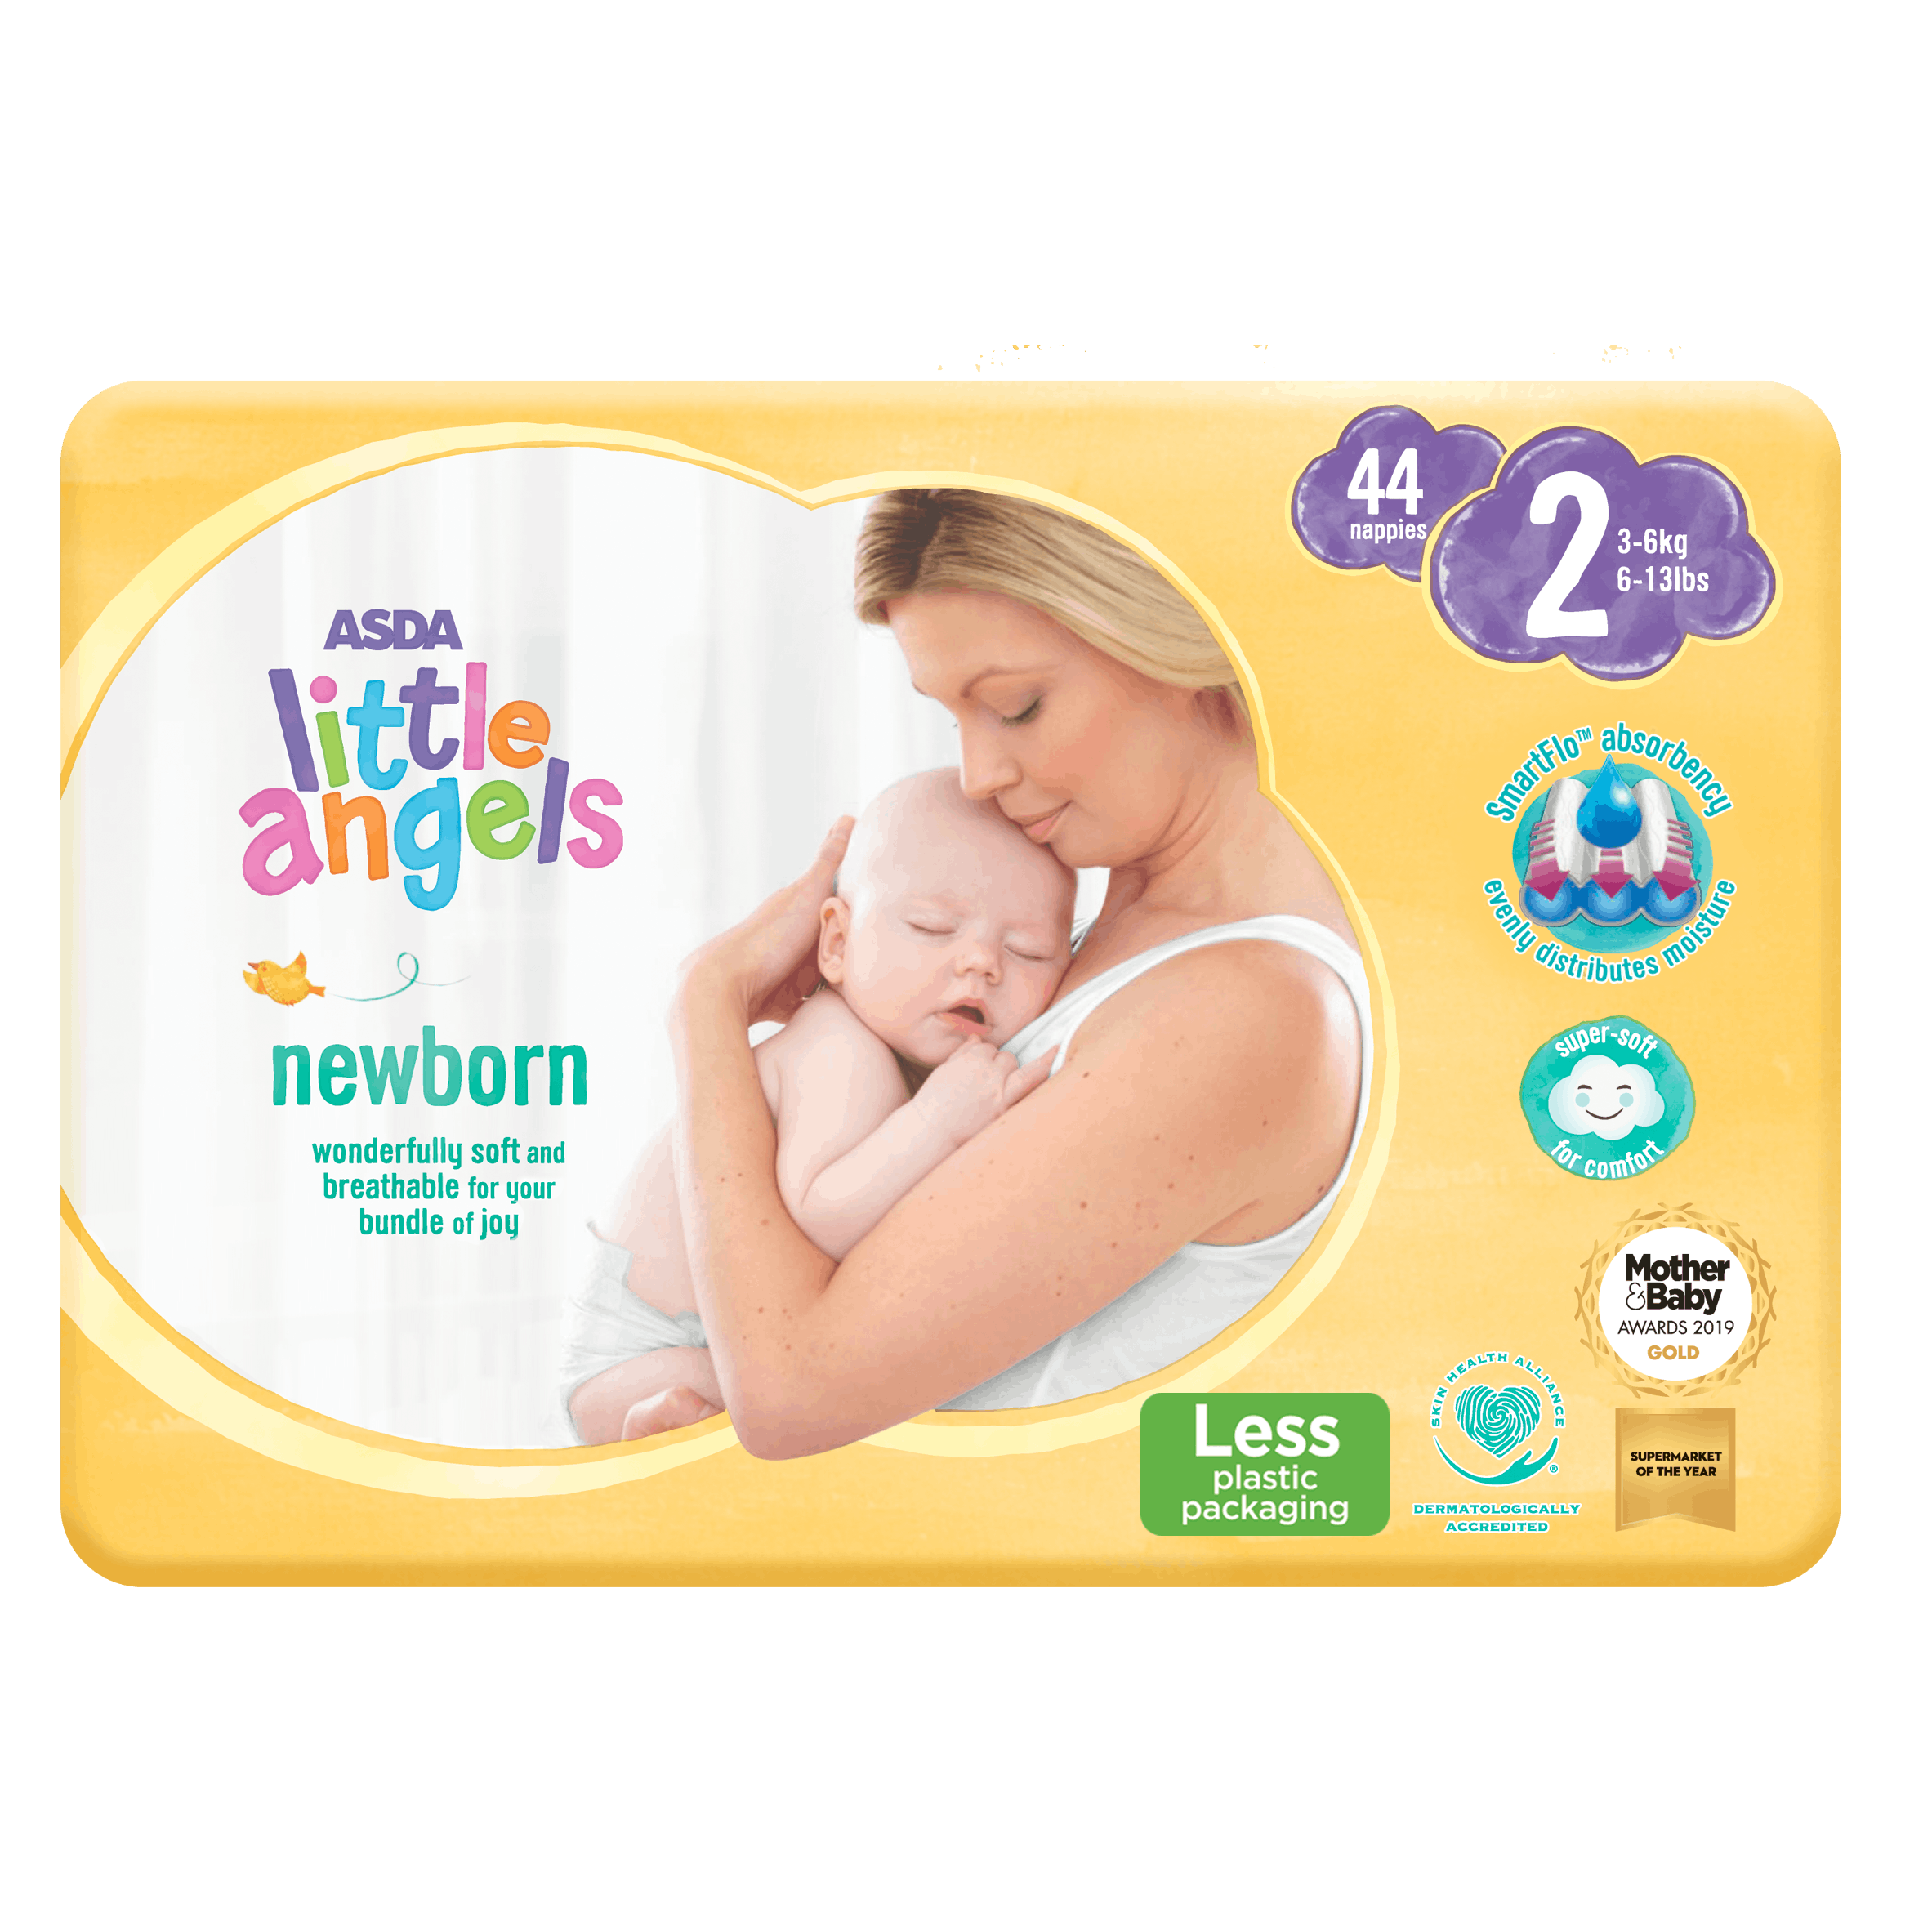 Little Angels newborn size | Reviews | Mother & Baby